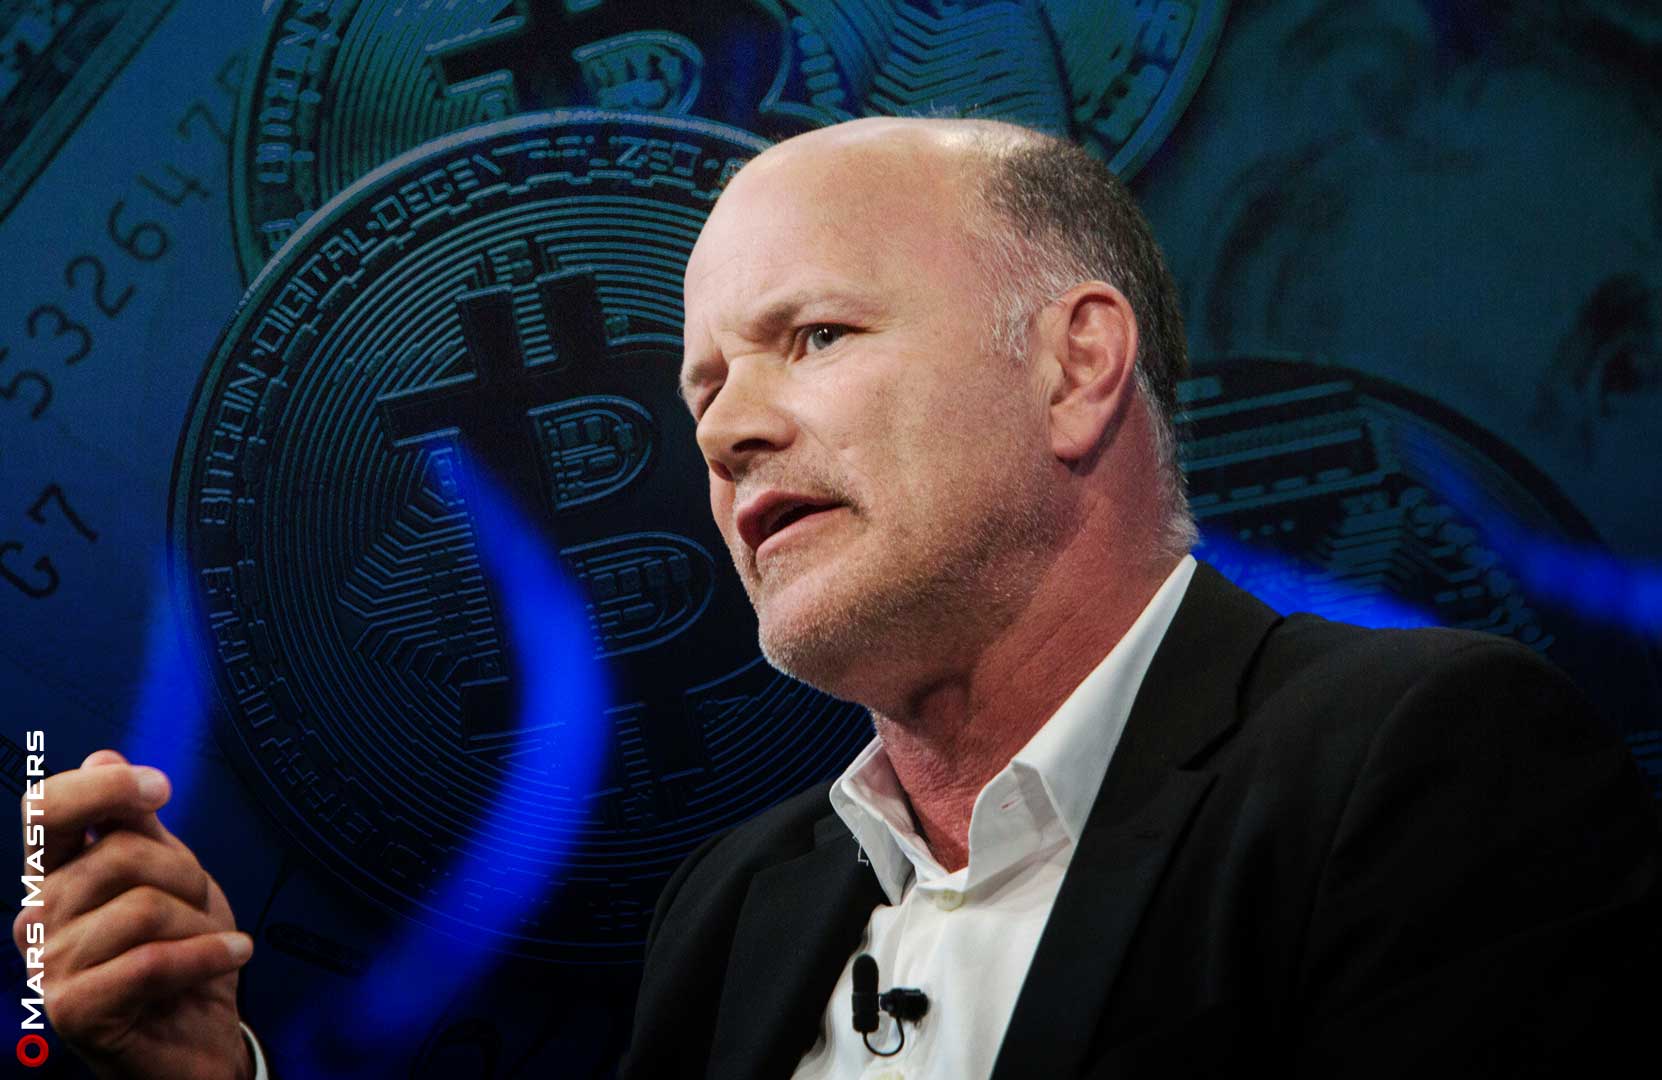 Mike Novogratz claims the price of Bitcoin should be corrected after gaining 100% in weeks